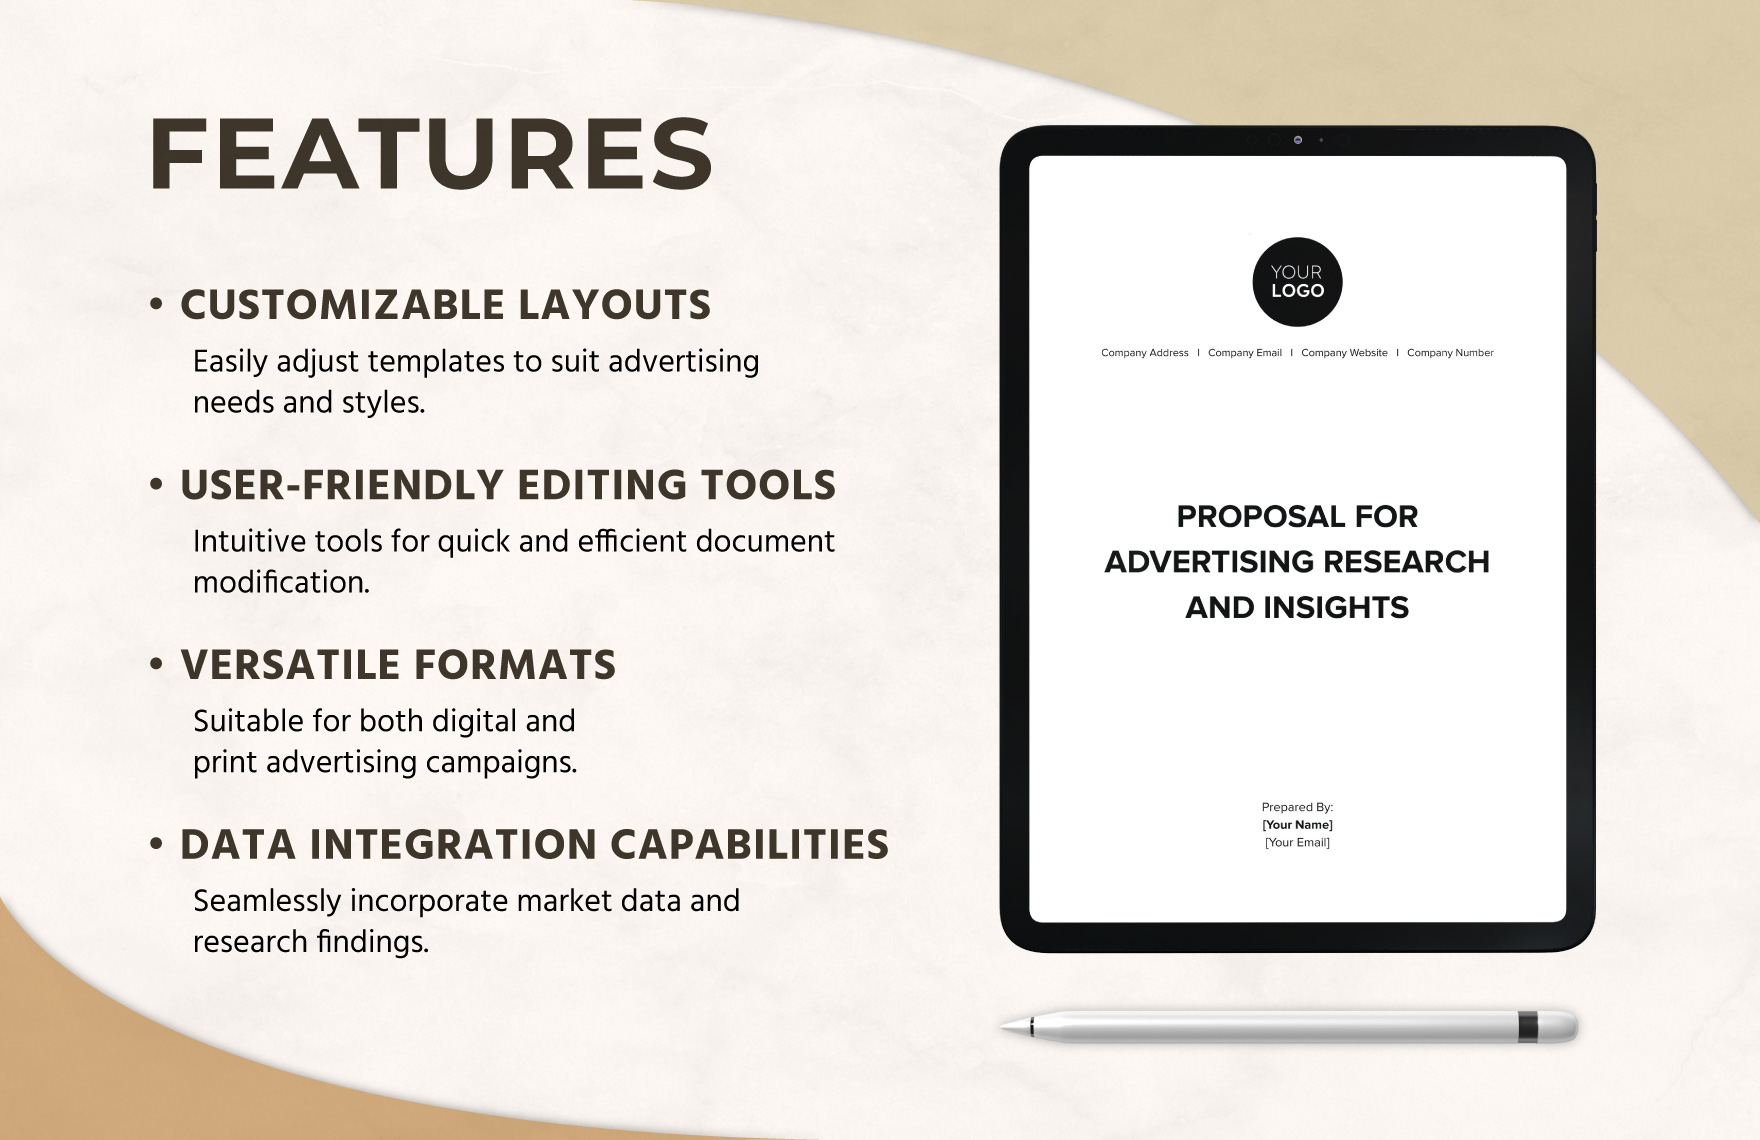 CProposal for Advertising Research and Insights Template